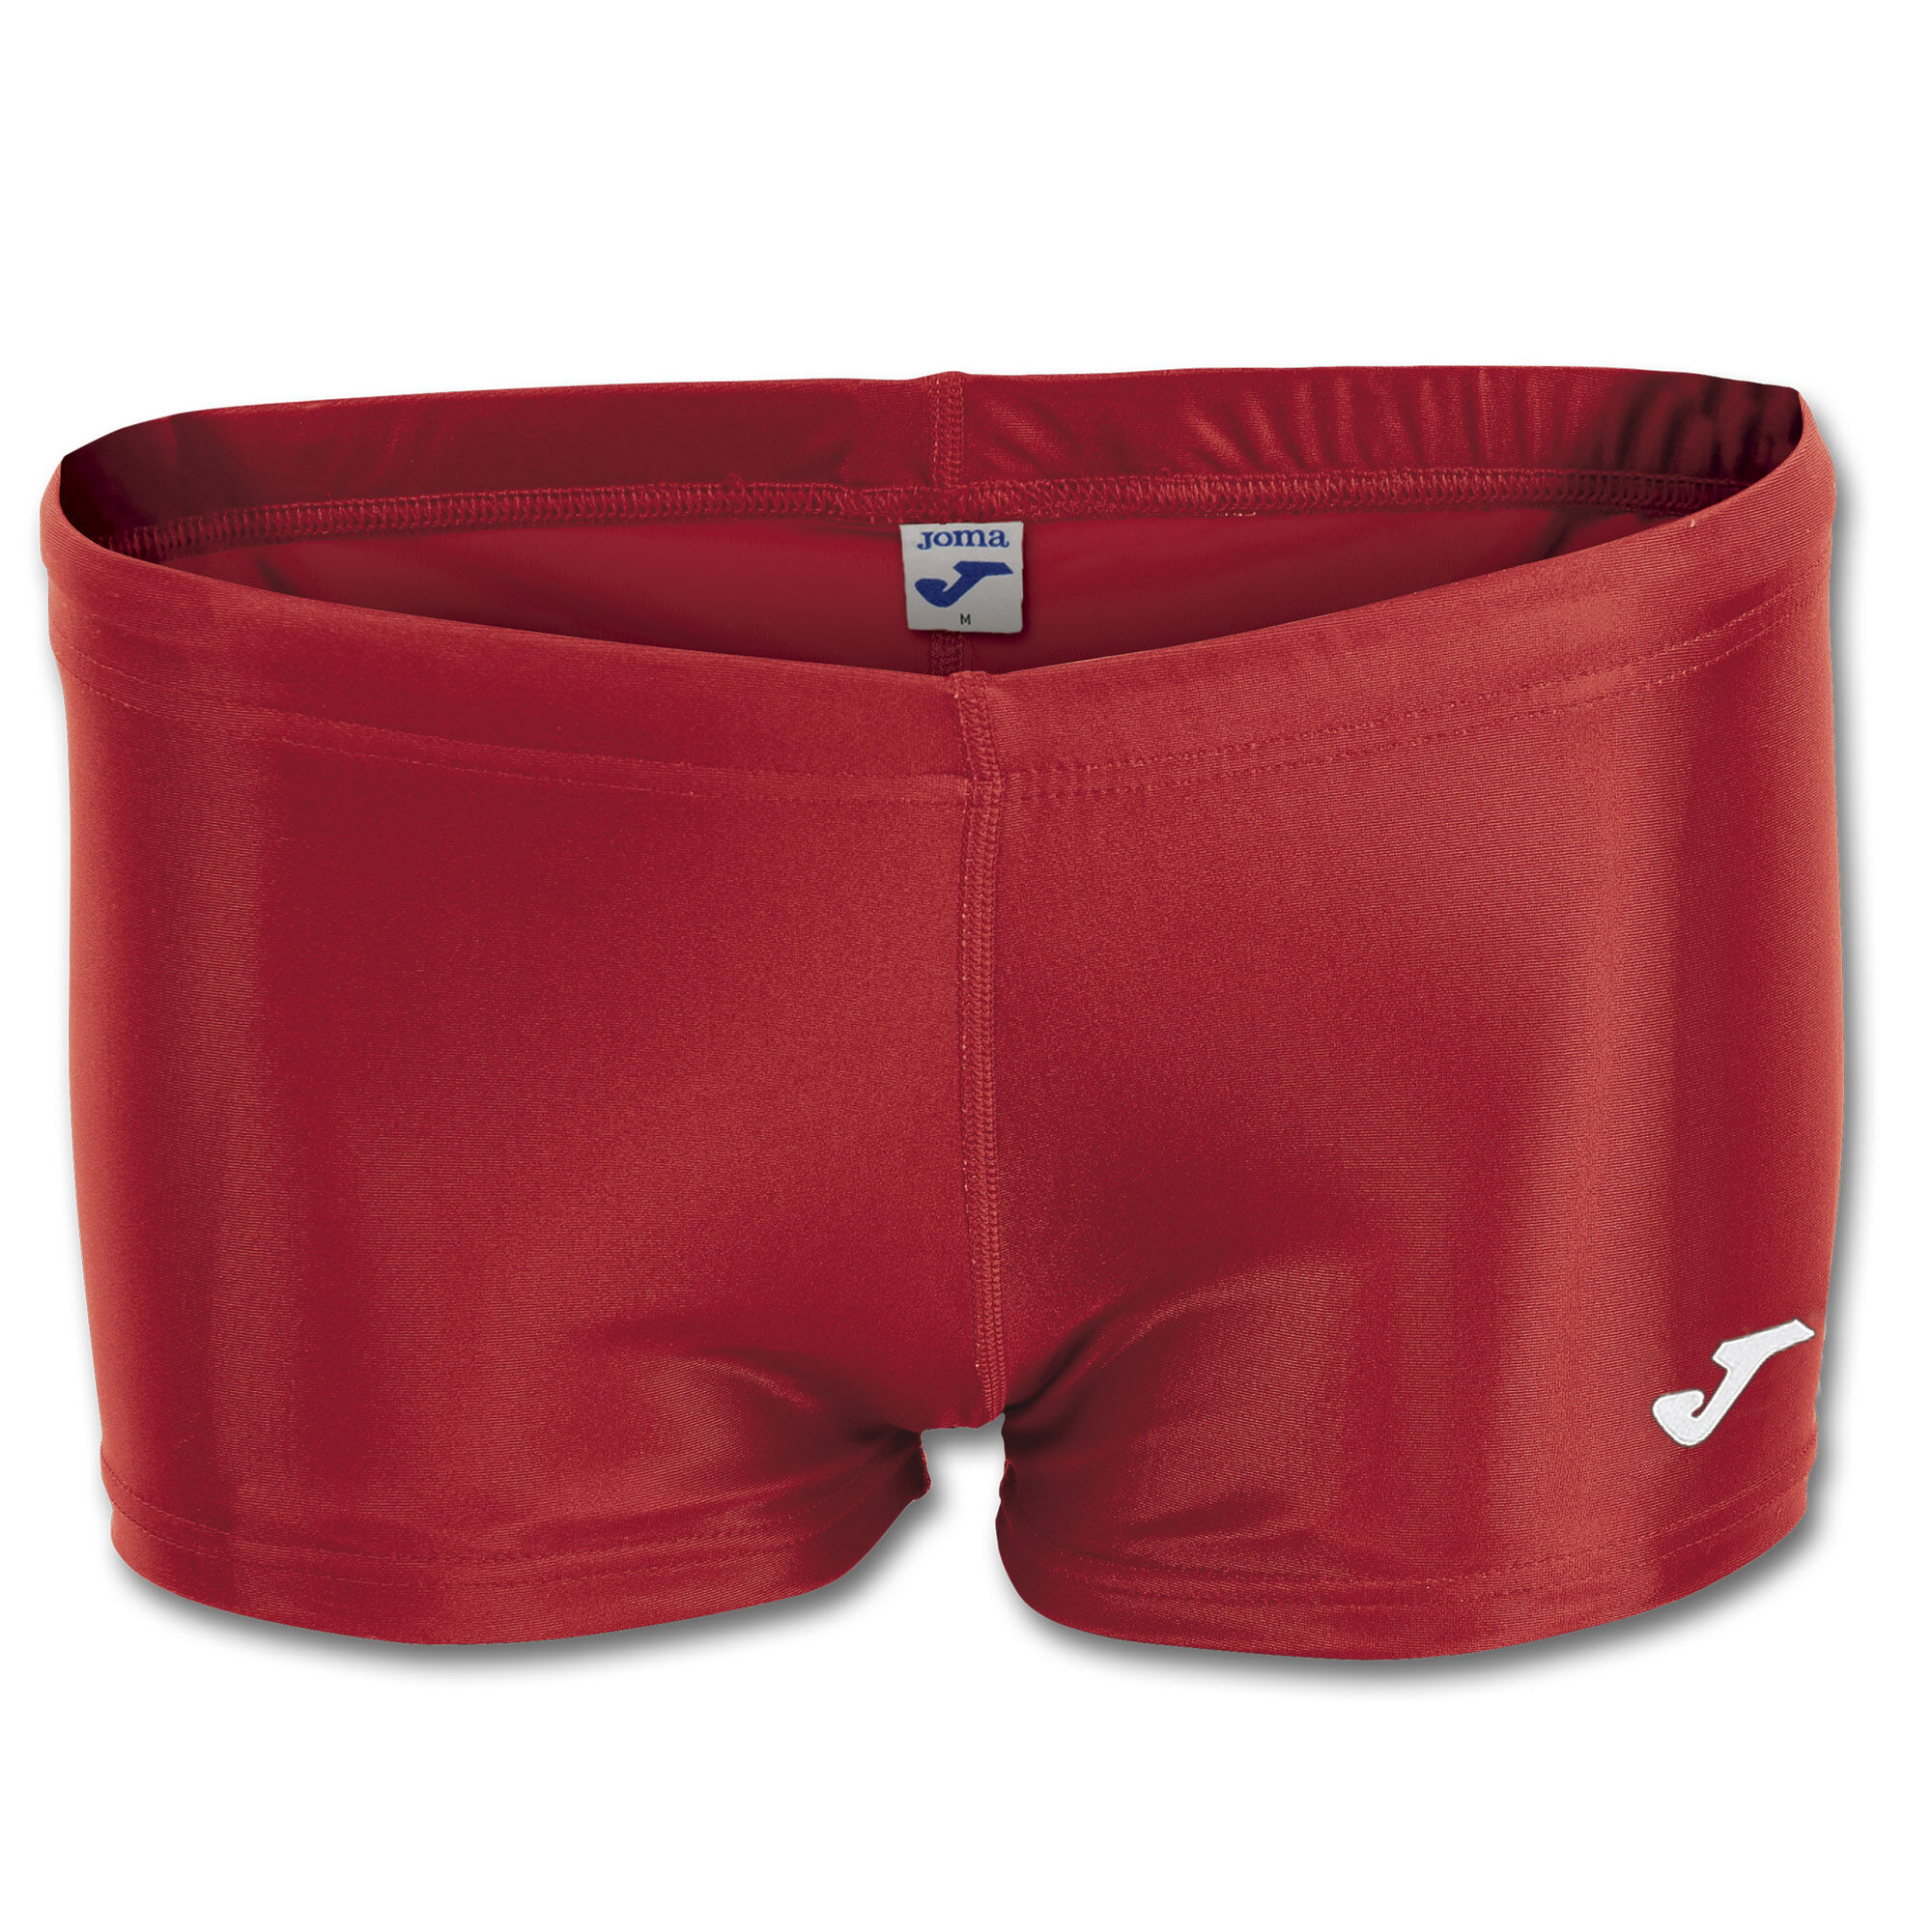 Cuissard femme Olimpia rouge